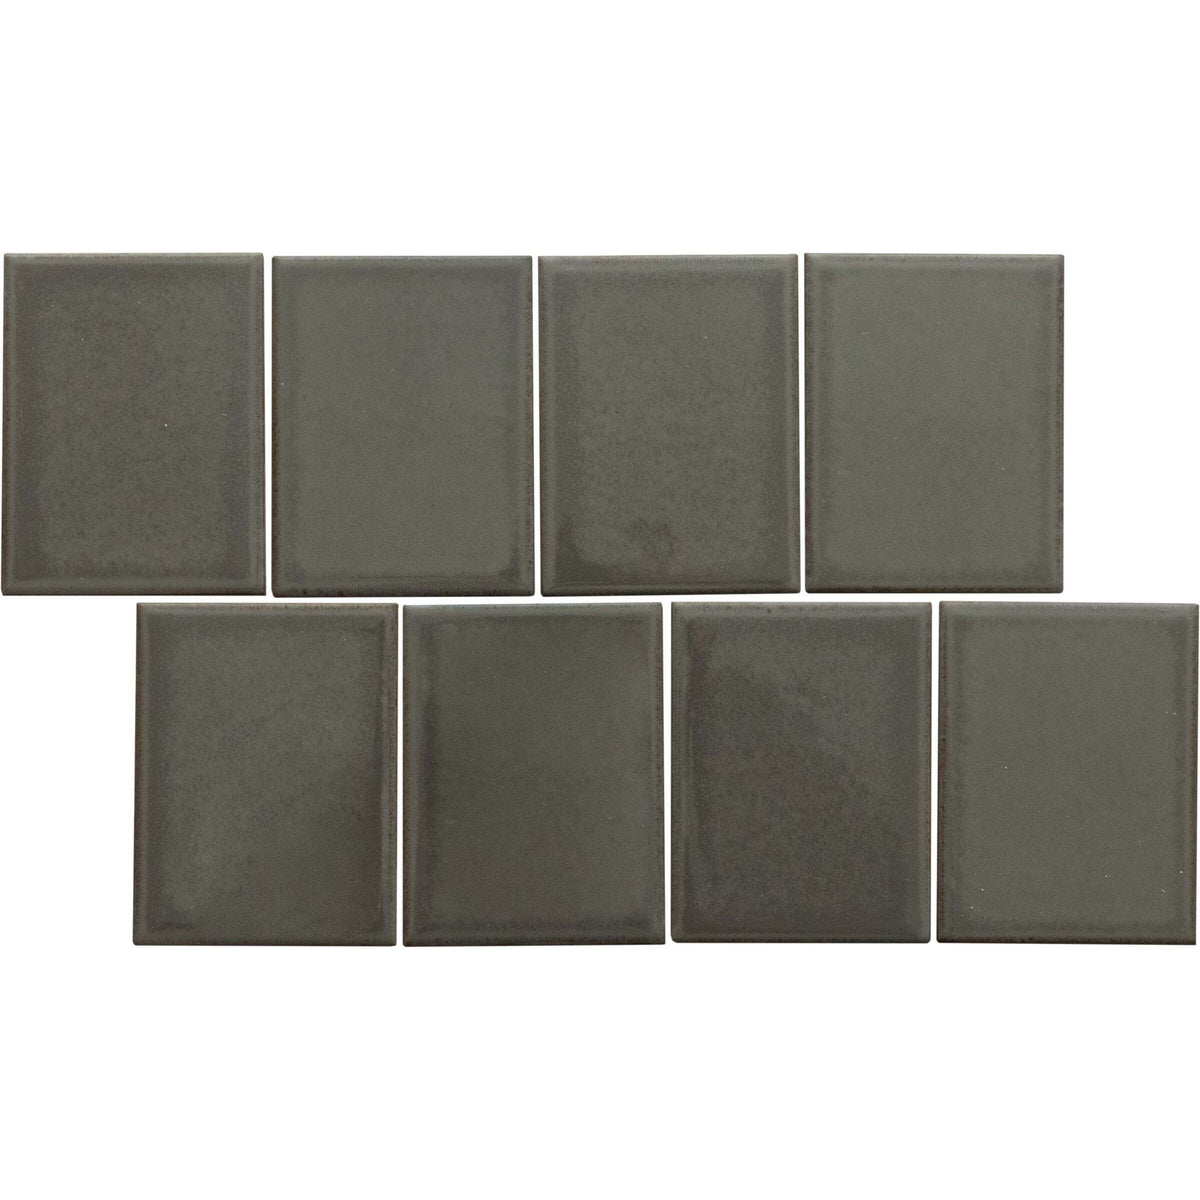 Emser Tile - Cuadro - 9 in. x 14 in. Glazed Porcelain Mosaic - Charcoal